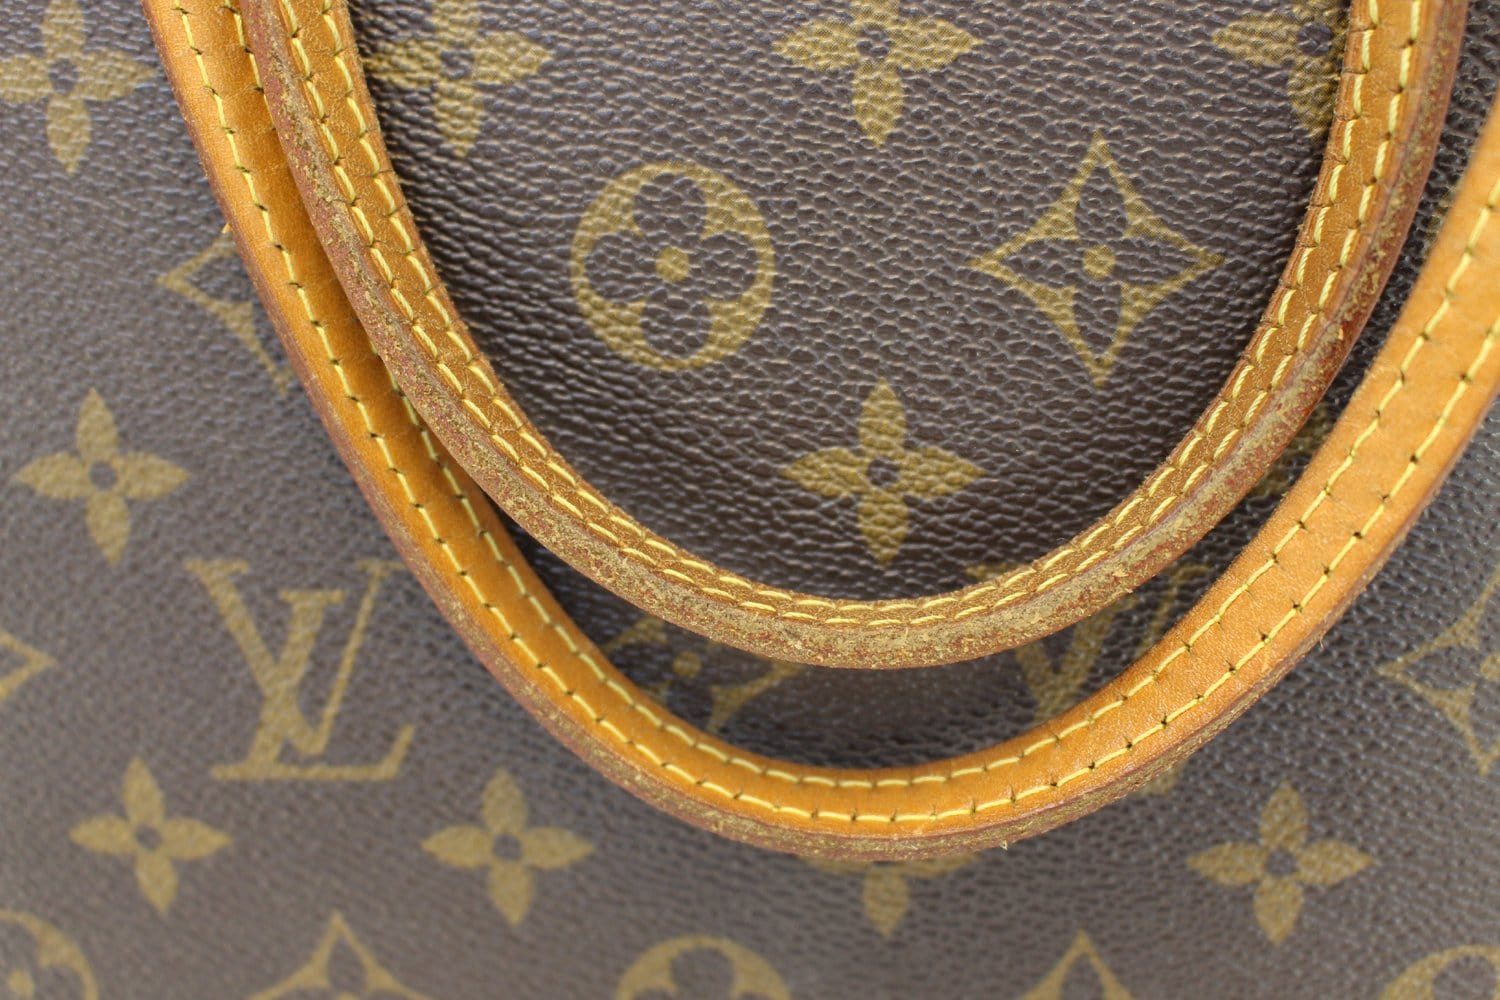 Louis Vuitton Neverfull Mm Tote Bag Monogram Canvas For Women